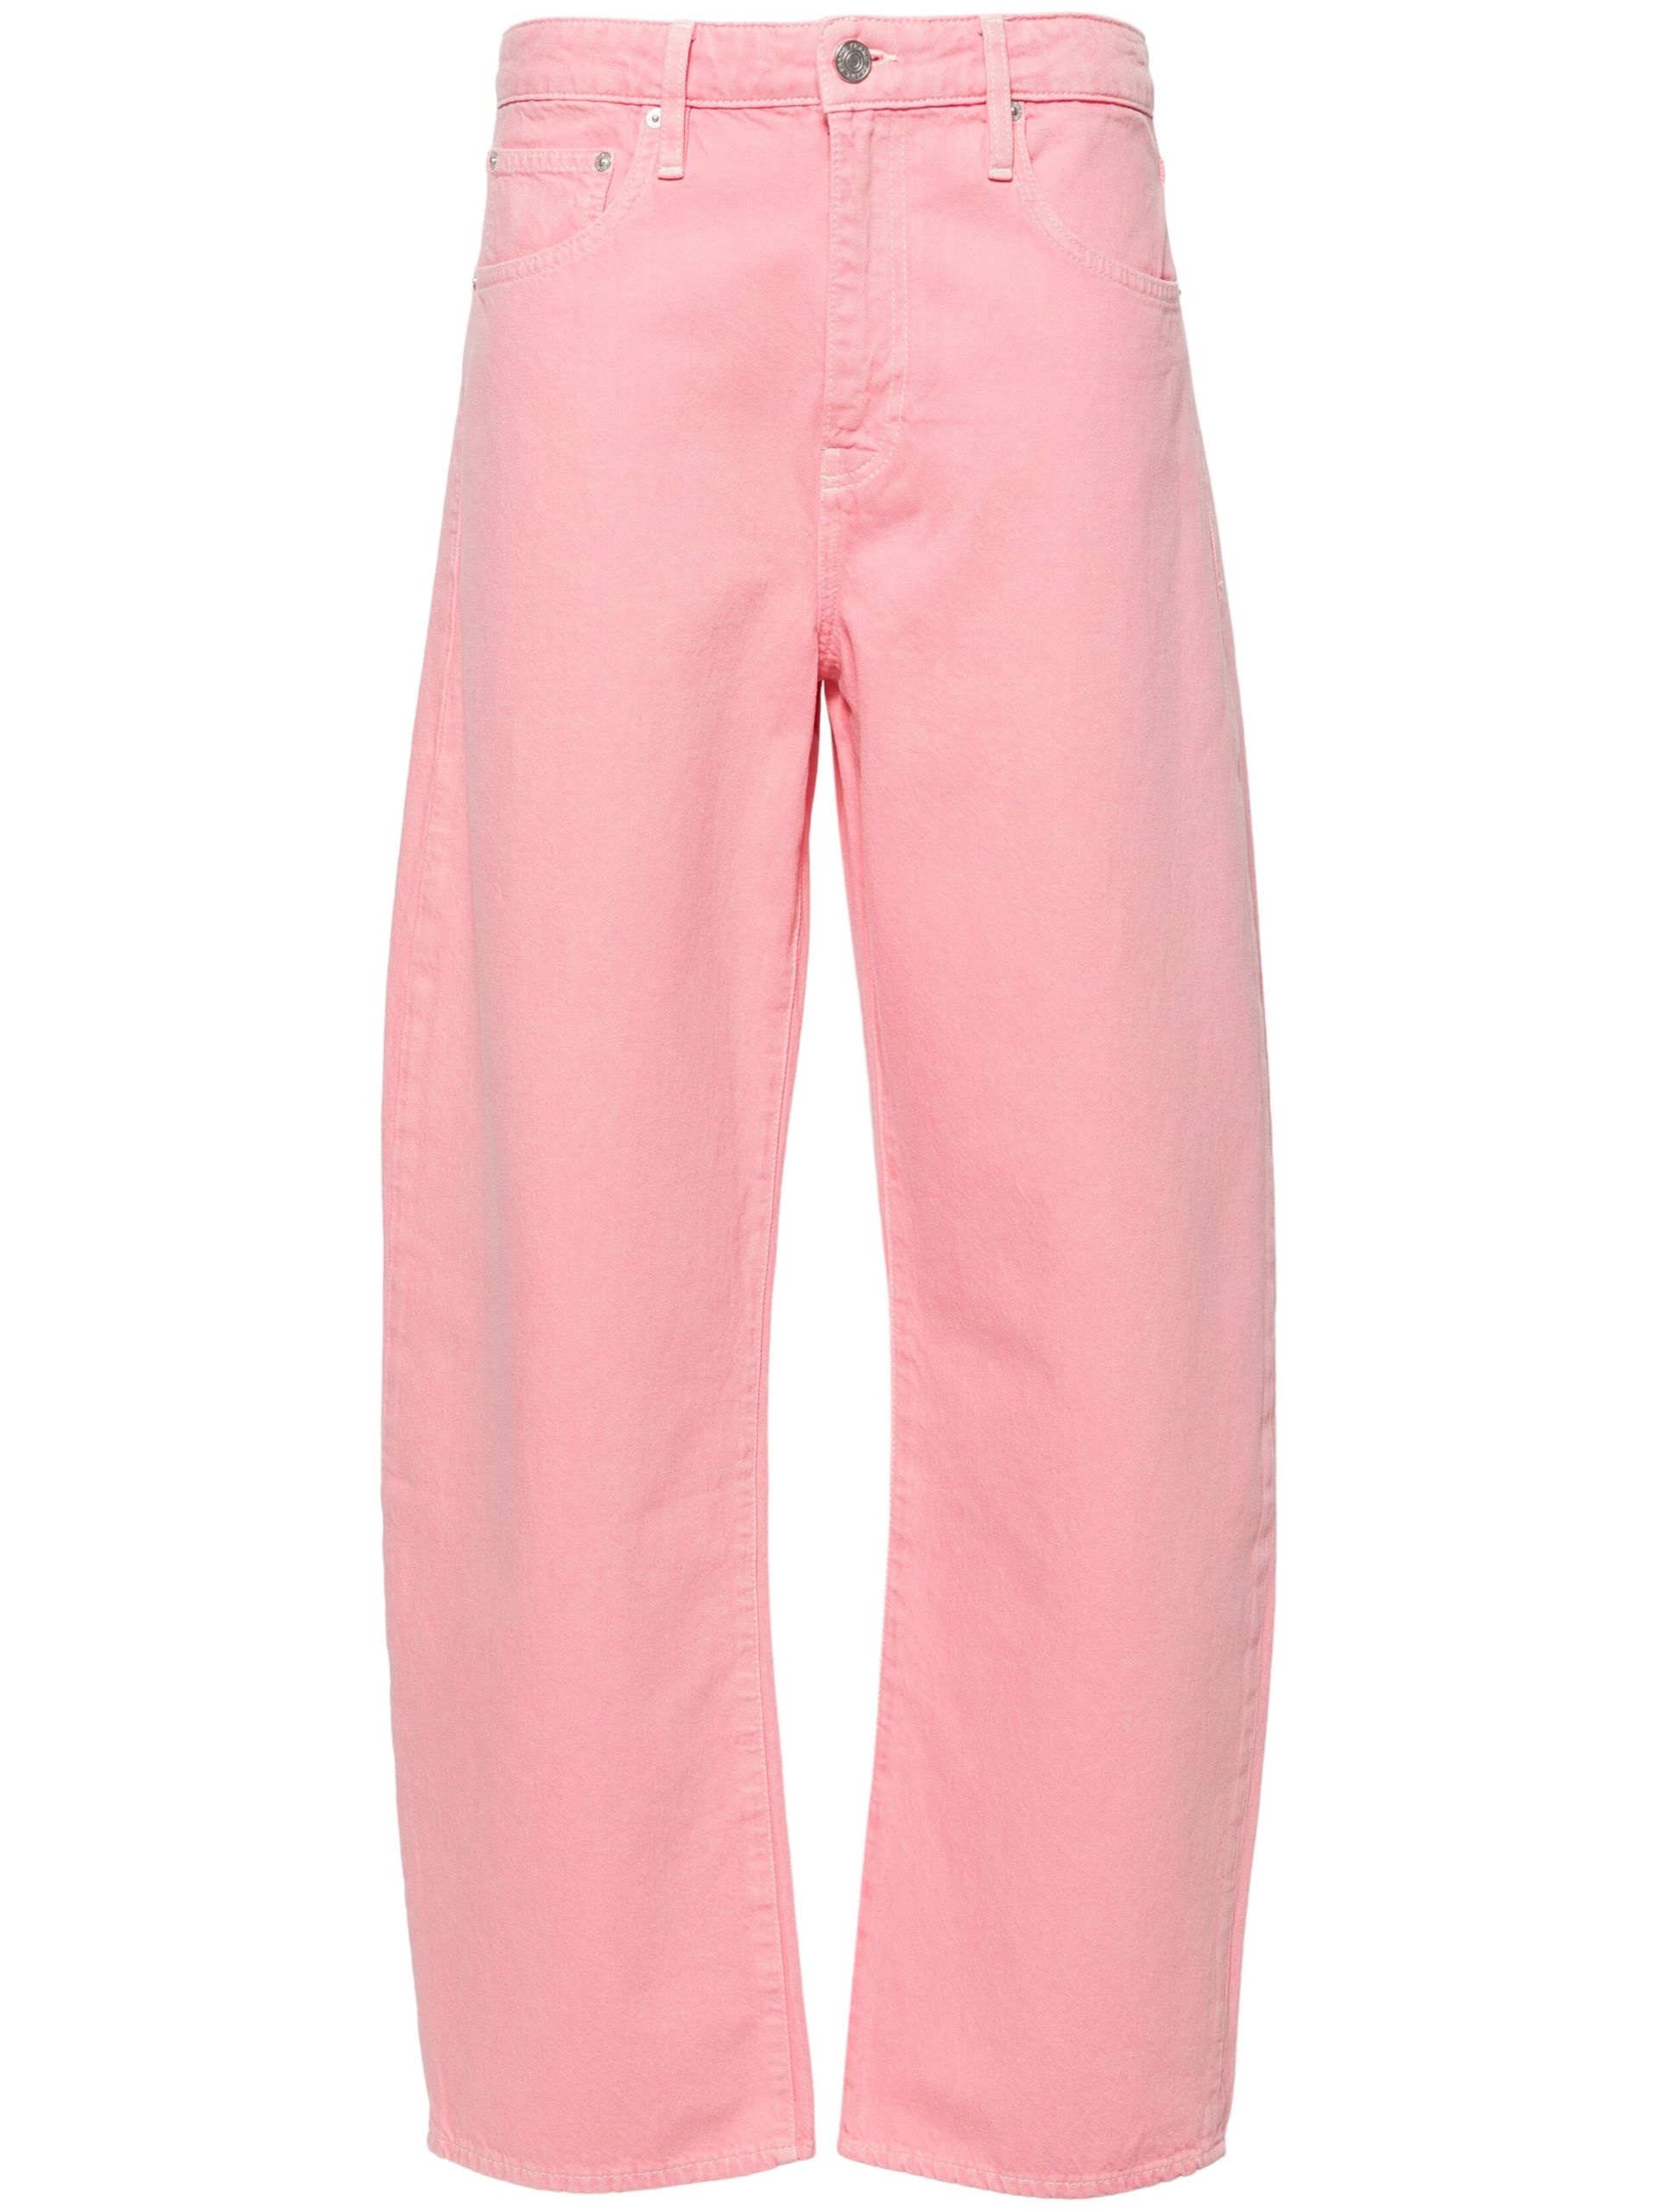 Pink Long Barrel Tapered Jeans - 1